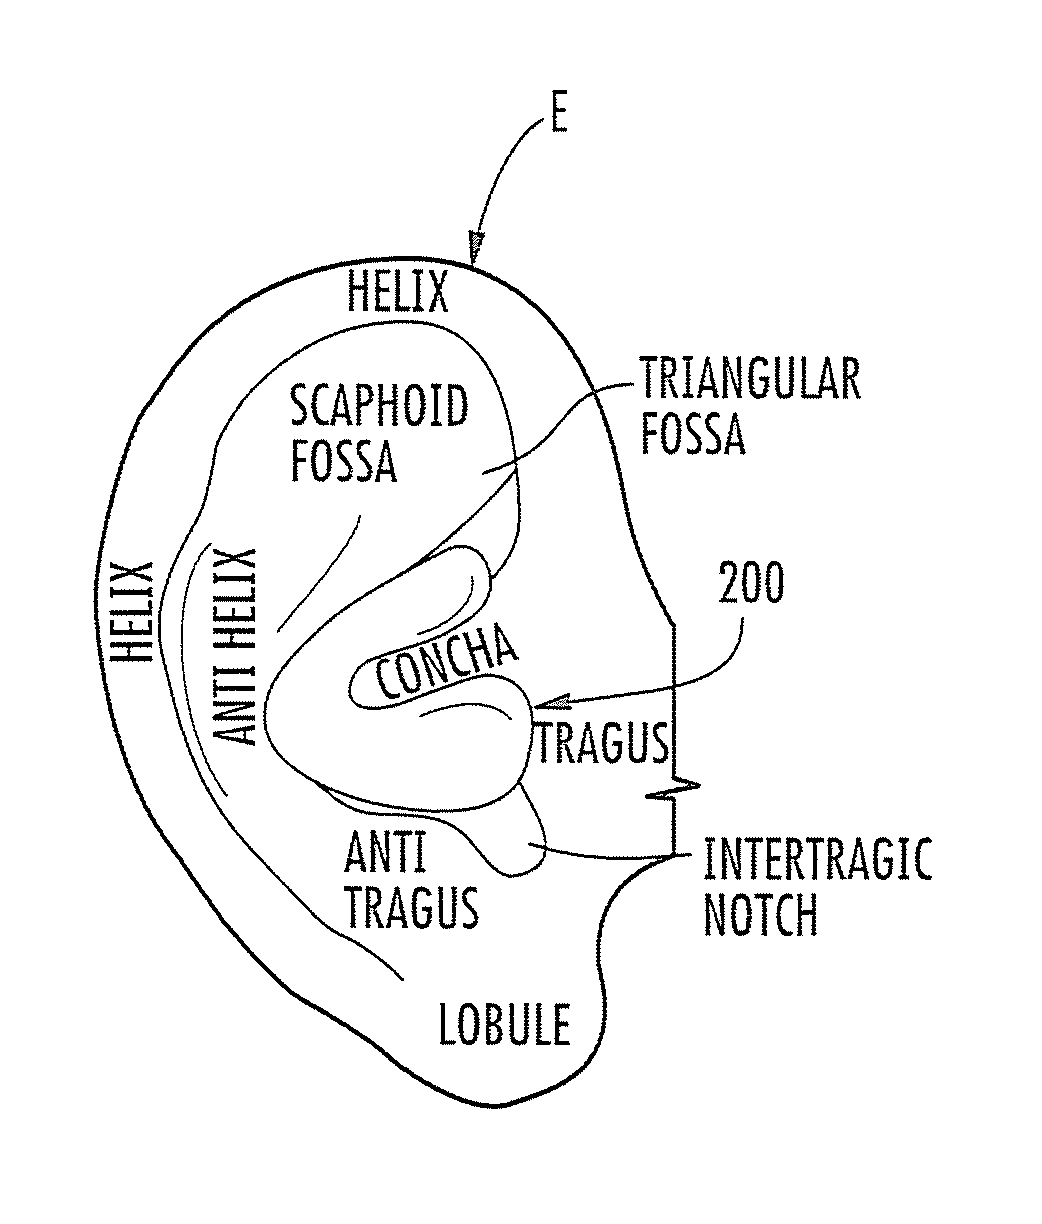 Form-fitted monitoring apparatus for health and environmental monitoring